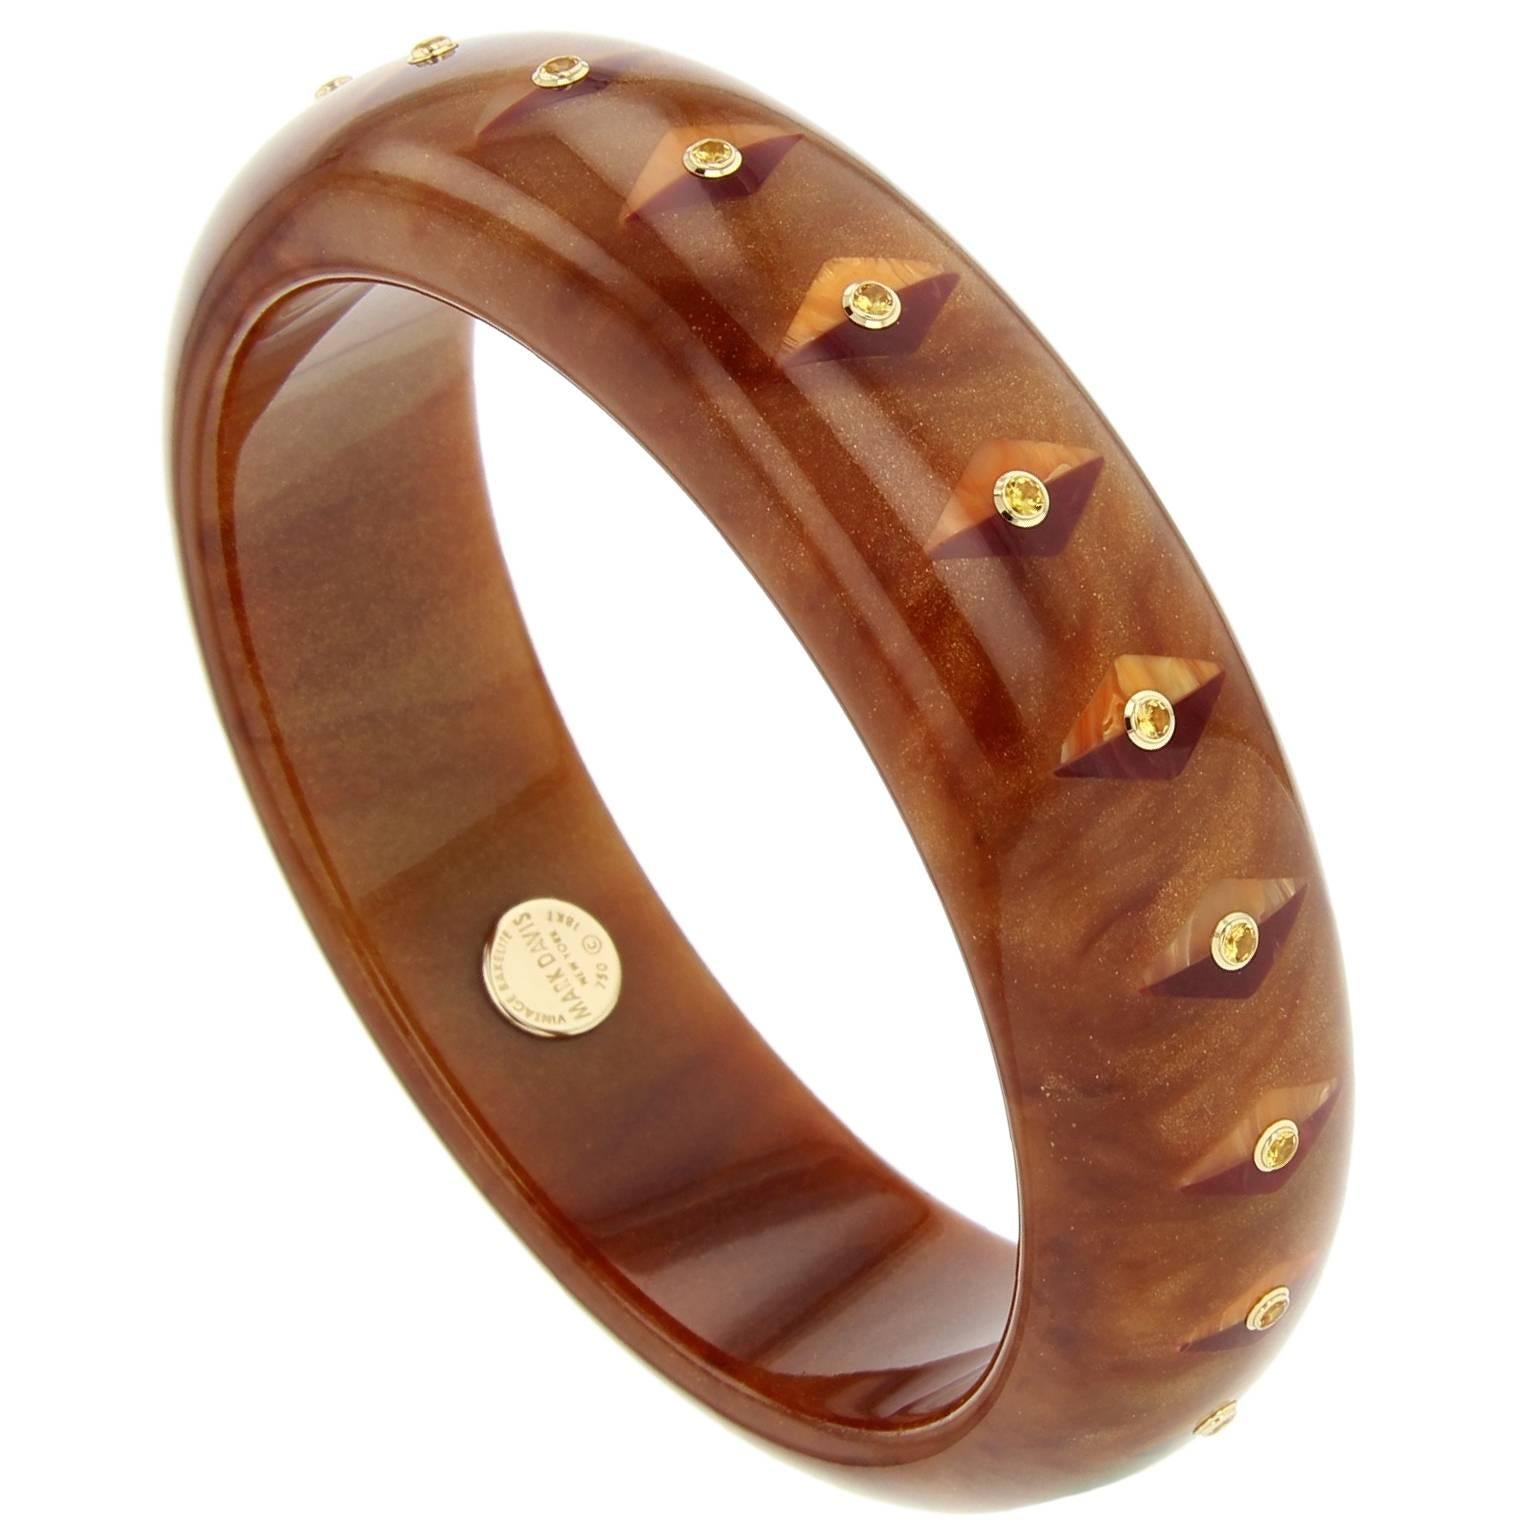 This elegant Mark Davis bangle is made of marbled brown and gold vintage bakelite. Precisely inlaid with a lozenge-shaped motif composed of half orange and half burgundy vintage bakelite pieces. Finished with lively yellow sapphires bezel-set in 18k